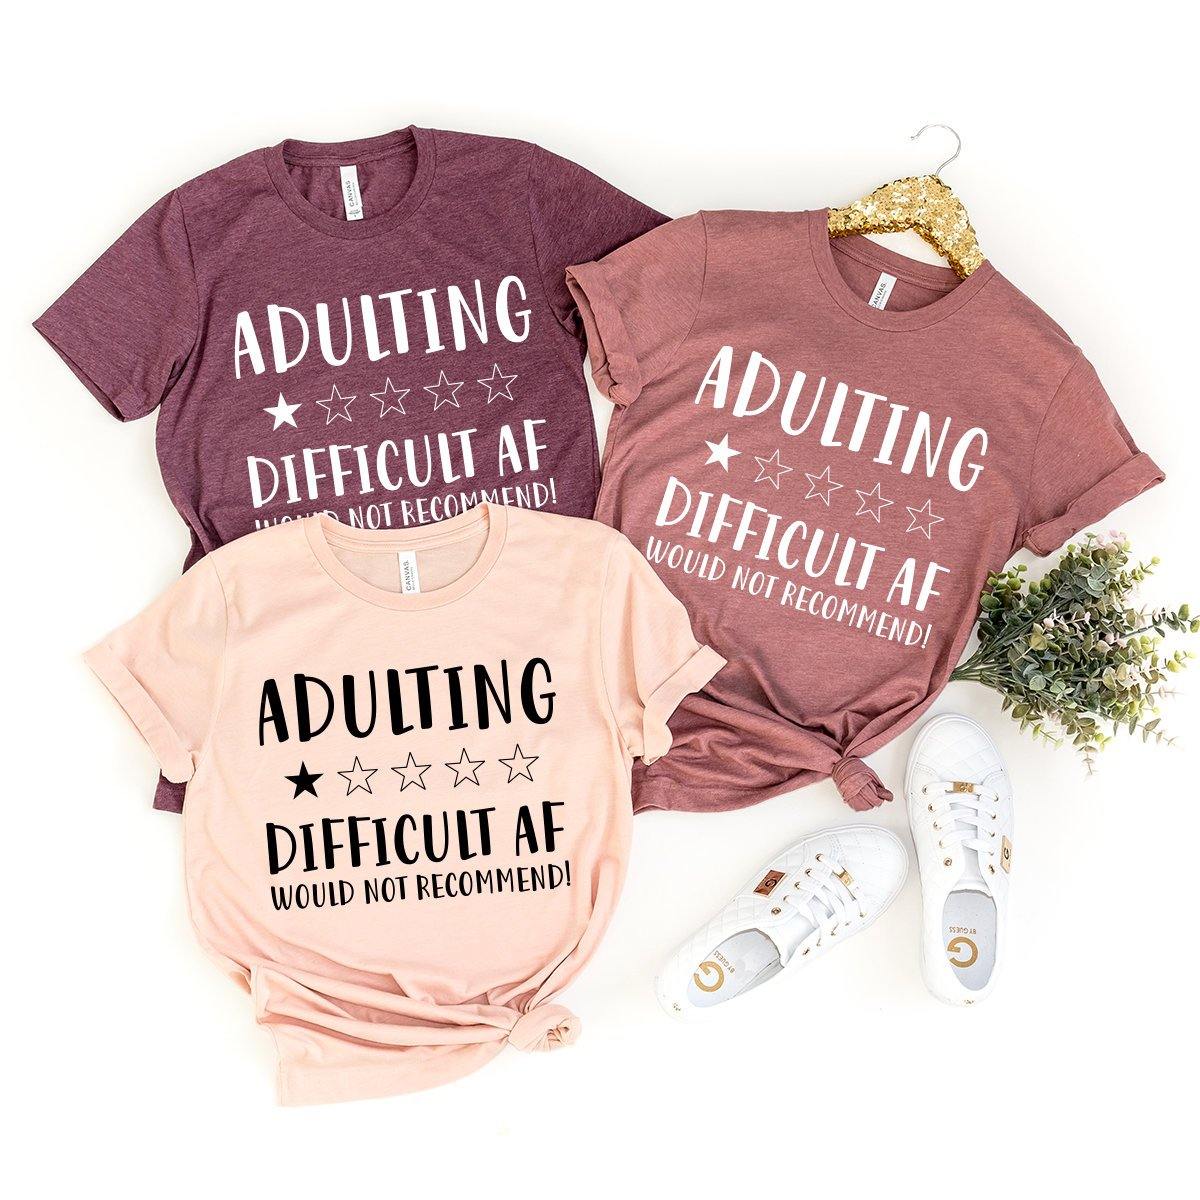 Funny Adult Tee, Adulting Difficult Af Shirt, Adulting Tshirt, Mom Life Shirt, Mom Shirt, Quarantine Shirt, Mom T-Shirt, Adulting Life Shirt - Fastdeliverytees.com